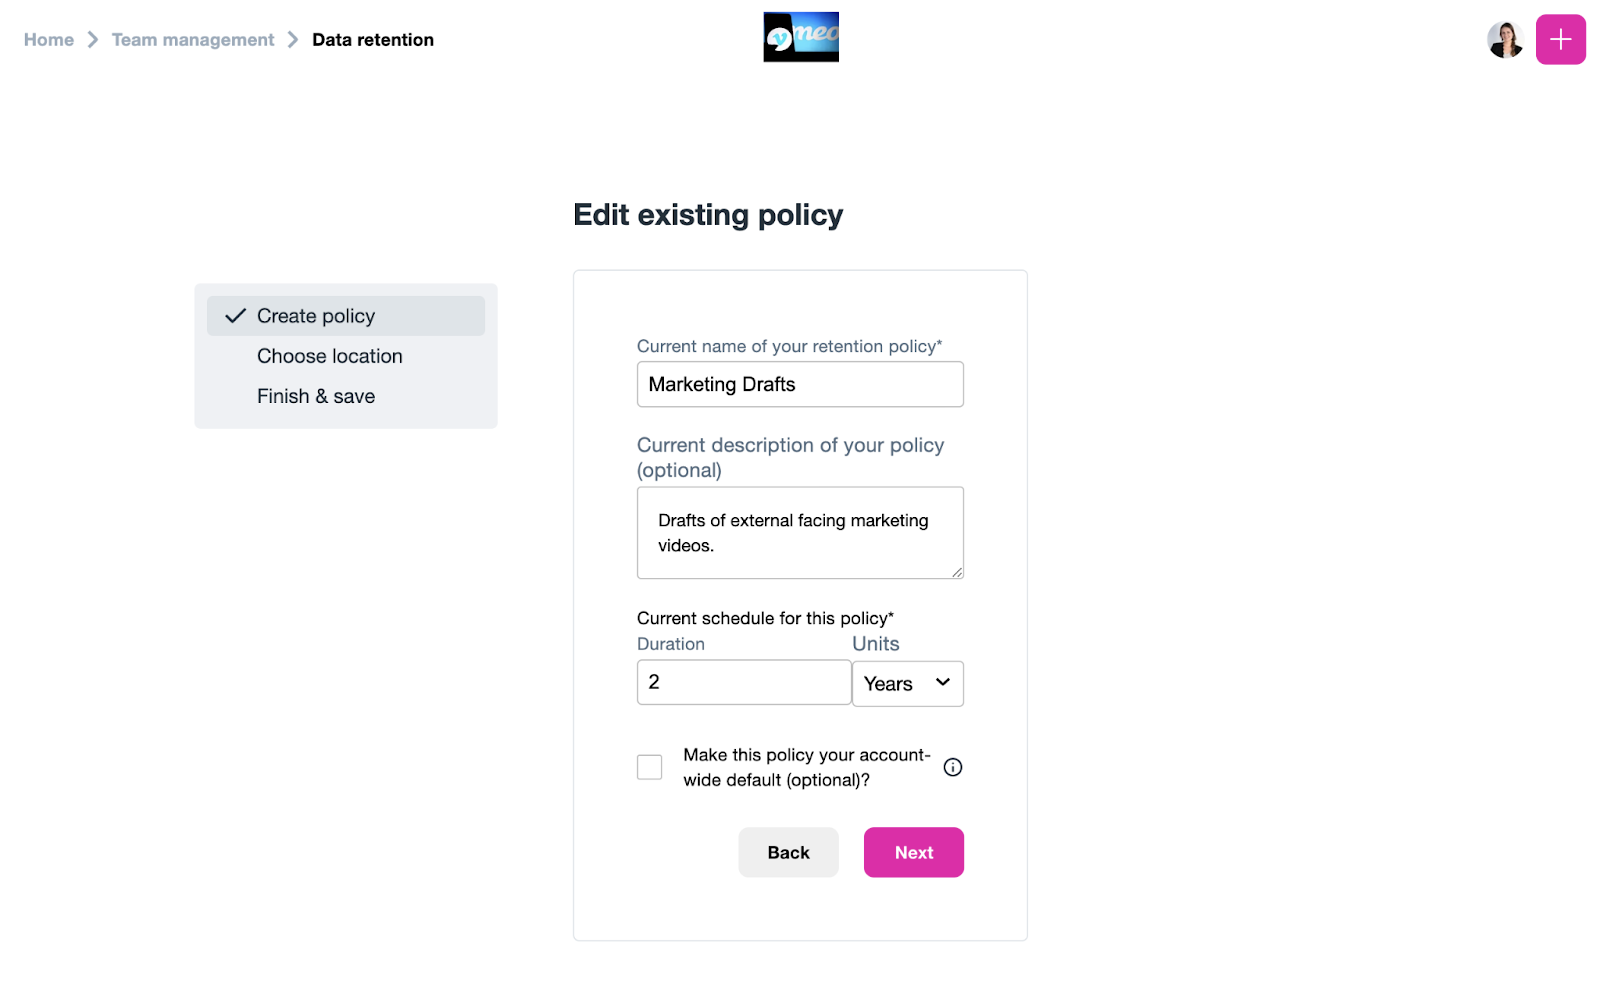 A screenshot of the Edit an Existing policy page. The first step is identical to the Create Policy page. Here, you can edit the name, optional description, and duration of your policy. You can also select whether or not the policy is the account-wide default. There are two buttons: Back (to return to the policy list) or Next (to move to the next step in the workflow where you can select the folders and groups the policy should be applied to).